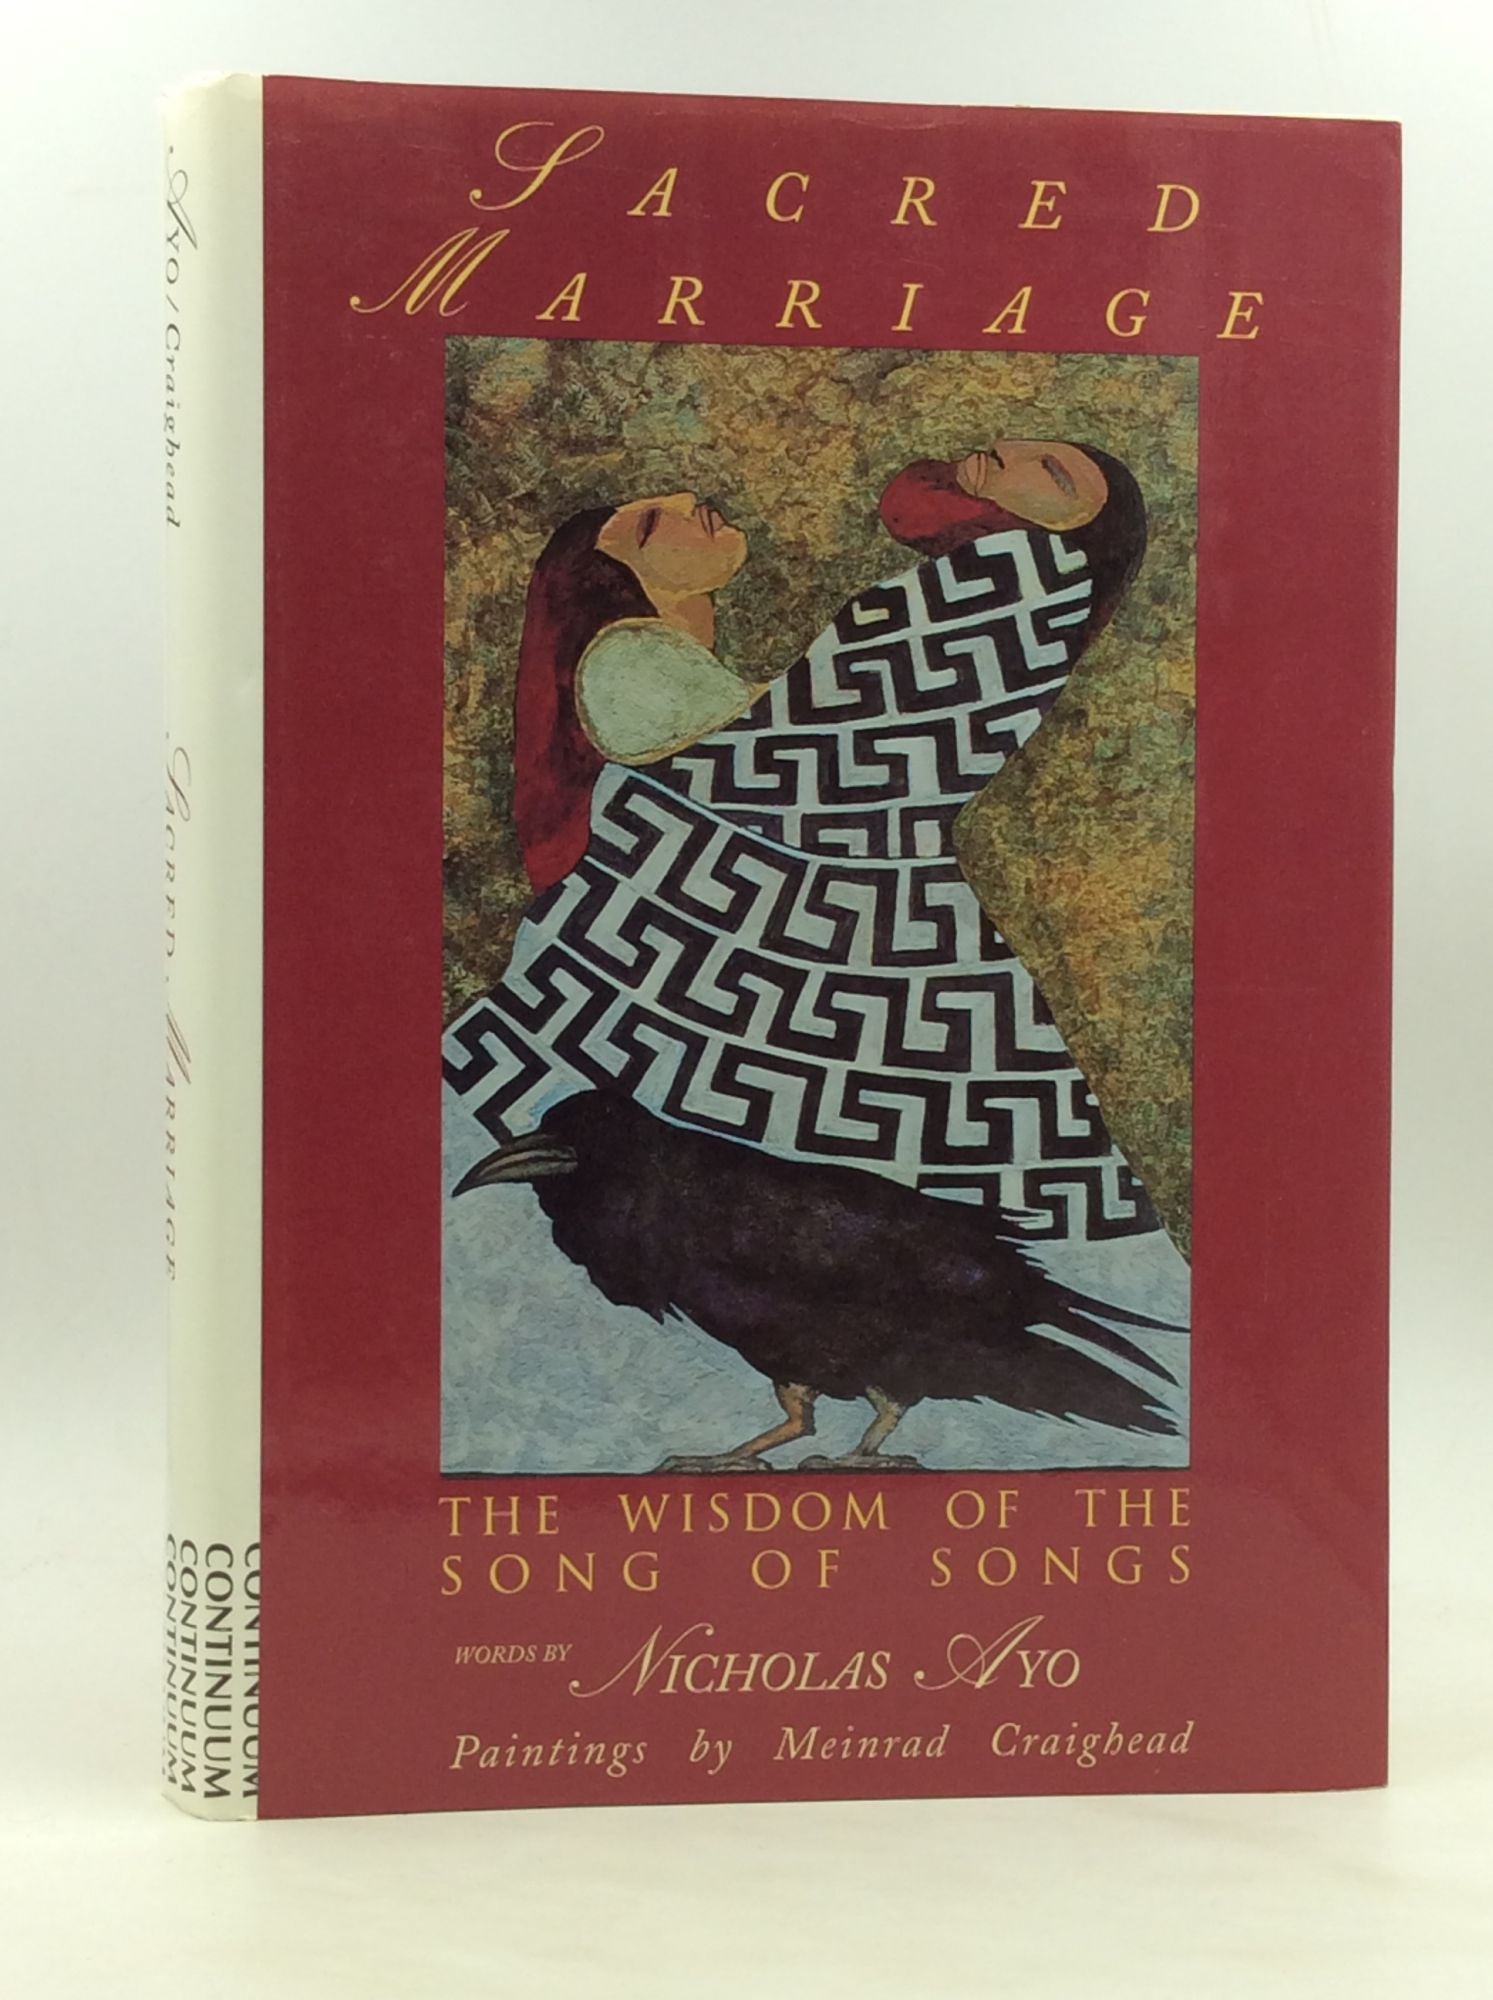 of　the　The　1st　MARRIAGE:　Songs　Edition　Nicholas　of　SACRED　Song　Wisdom　Ayo